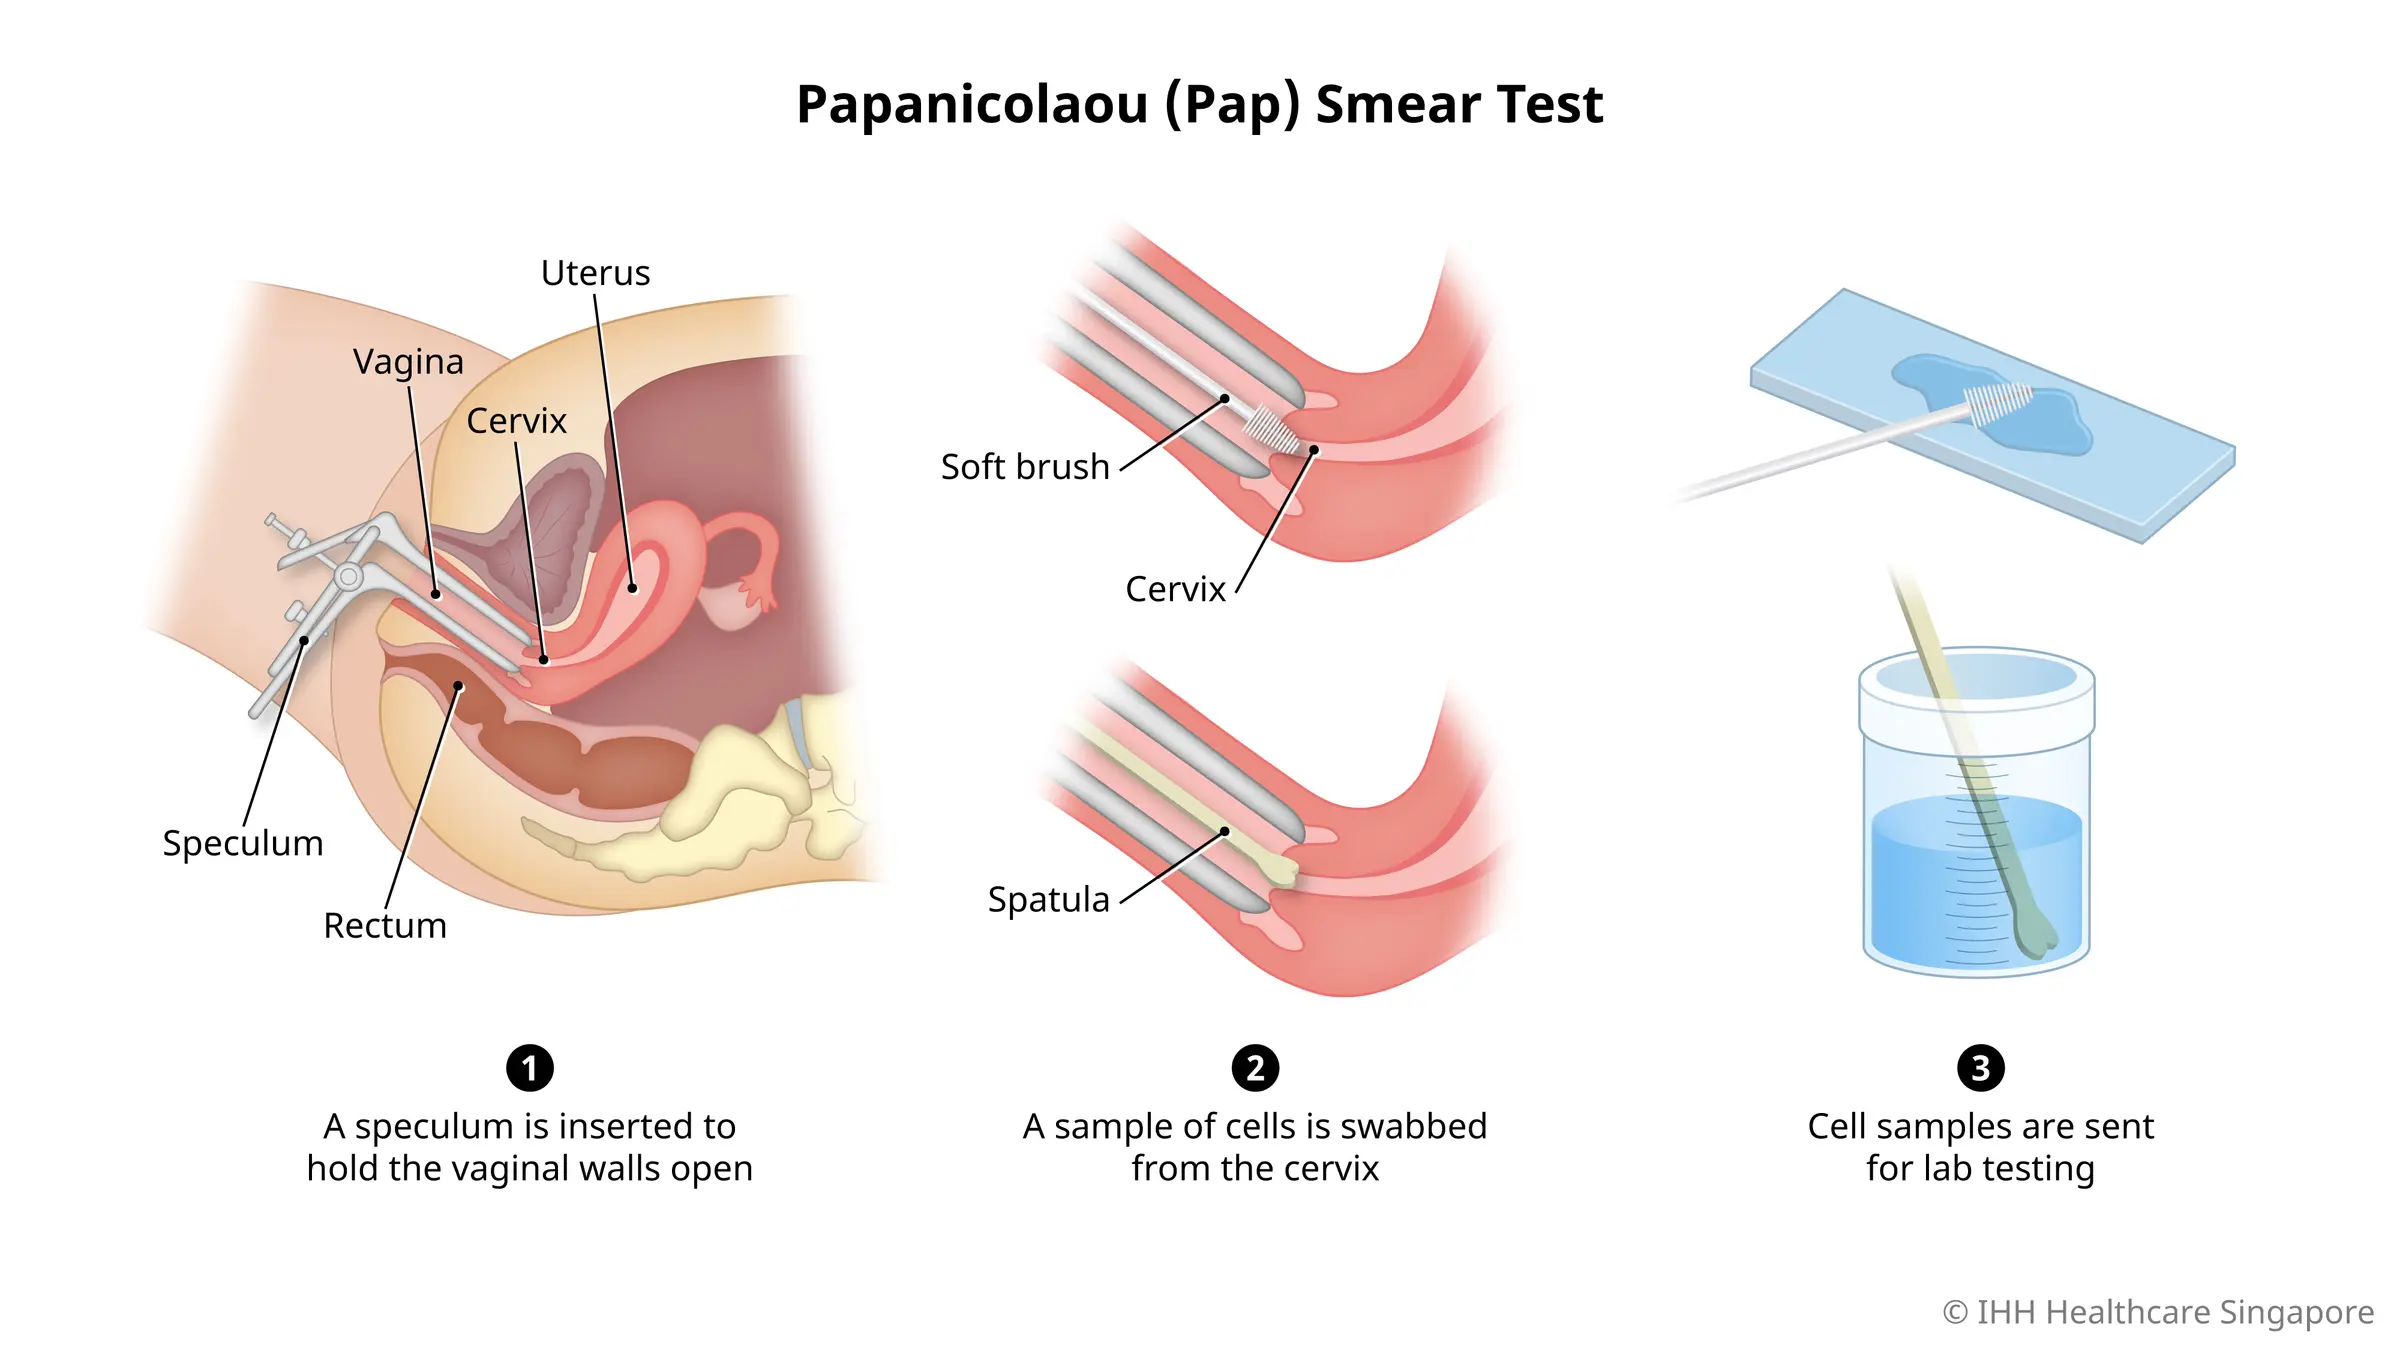 What can you expect in a Pap smear?